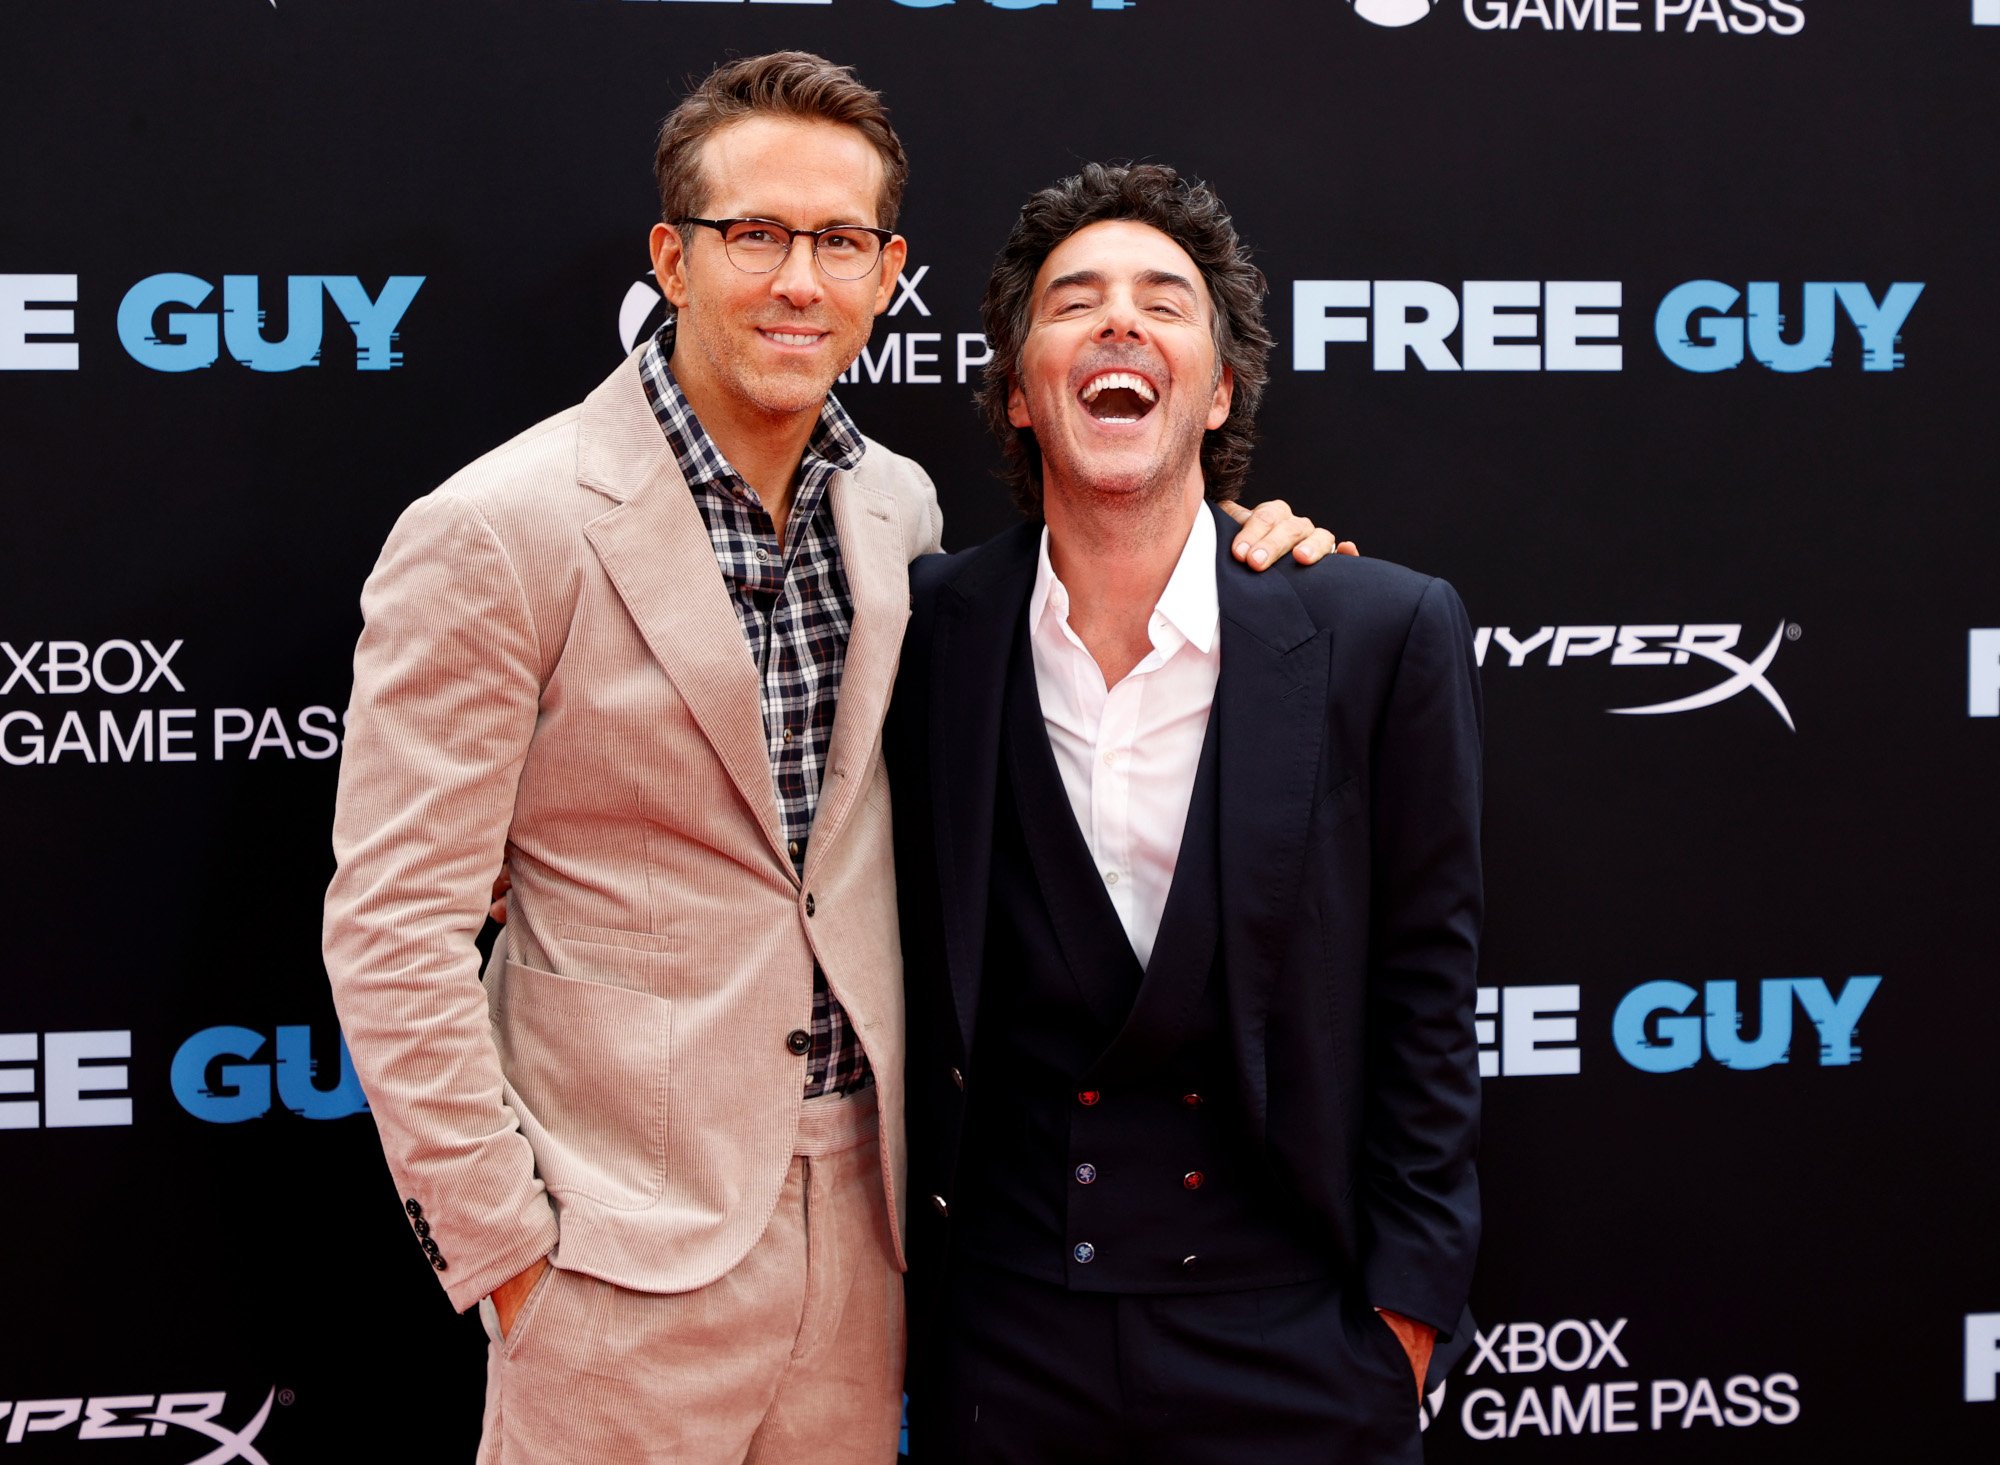 Ryan Reynolds and Shawn Levy at the premiere for Disney's 'Free Guy.' Reynolds has his arm around Levy, and Levy is laughing.